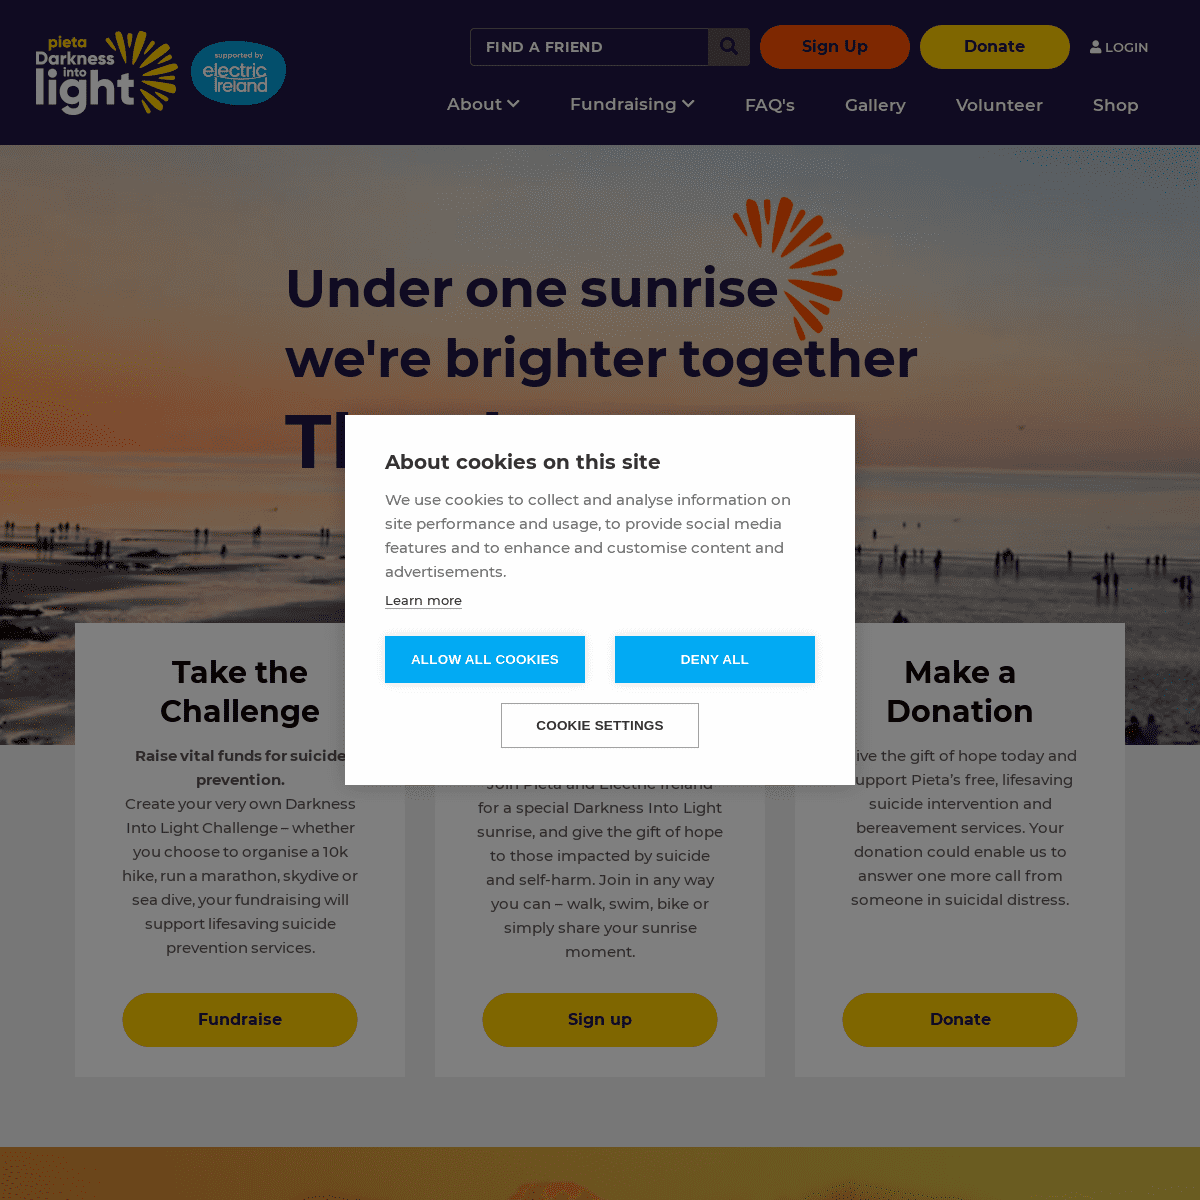 A complete backup of https://darknessintolight.ie